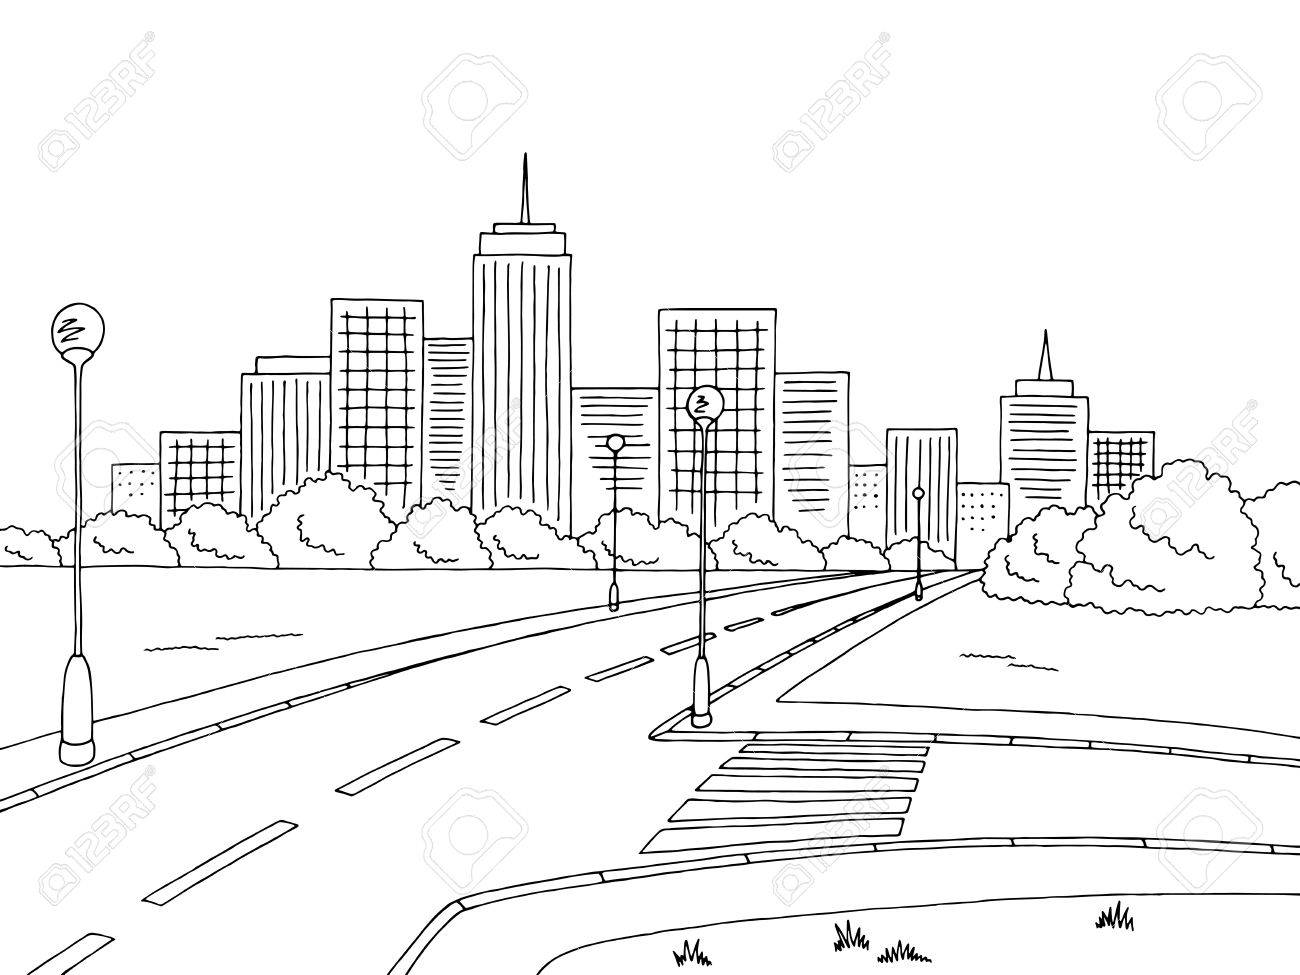 City street clipart black and white